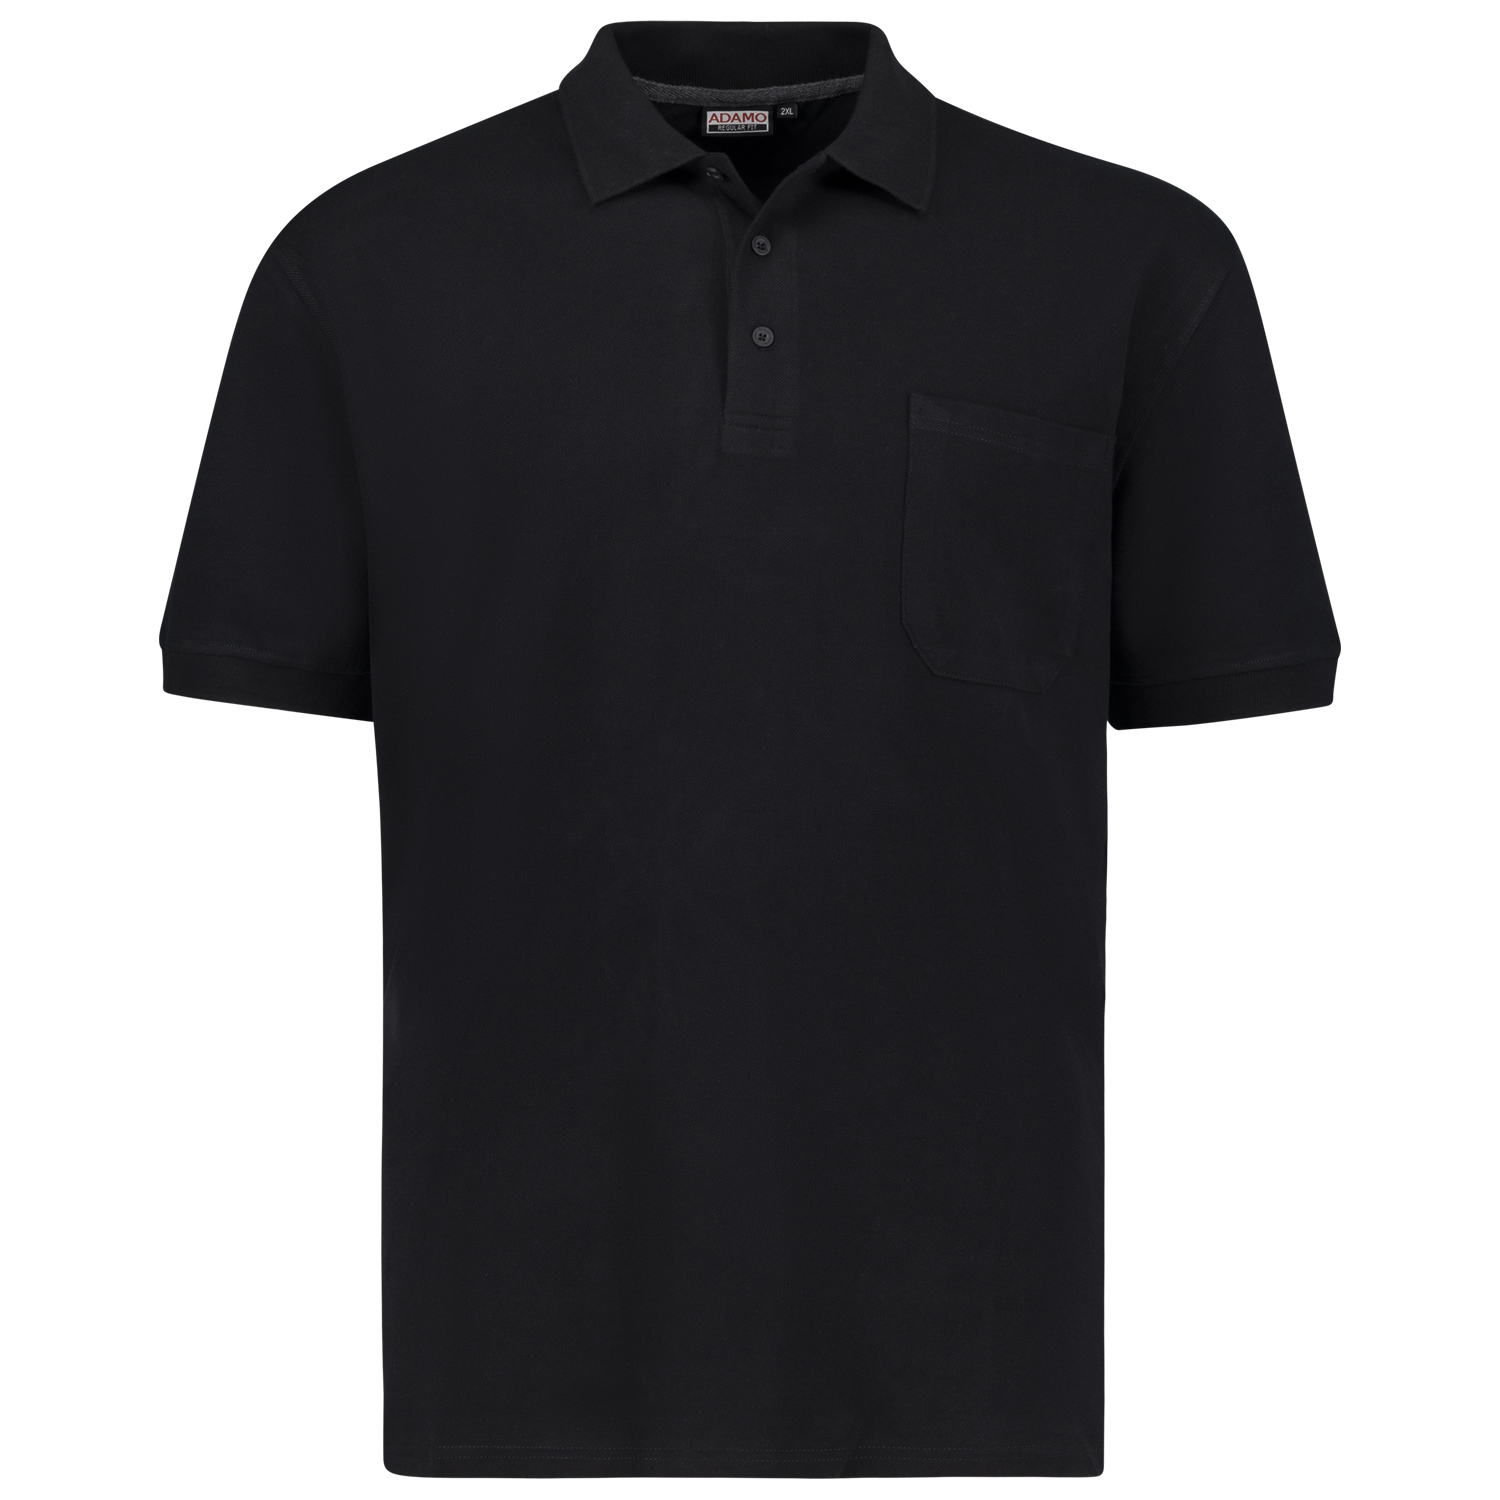 Short sleeve polo shirt REGULAR FIT series Keno by Adamo in black up to oversize 10XL